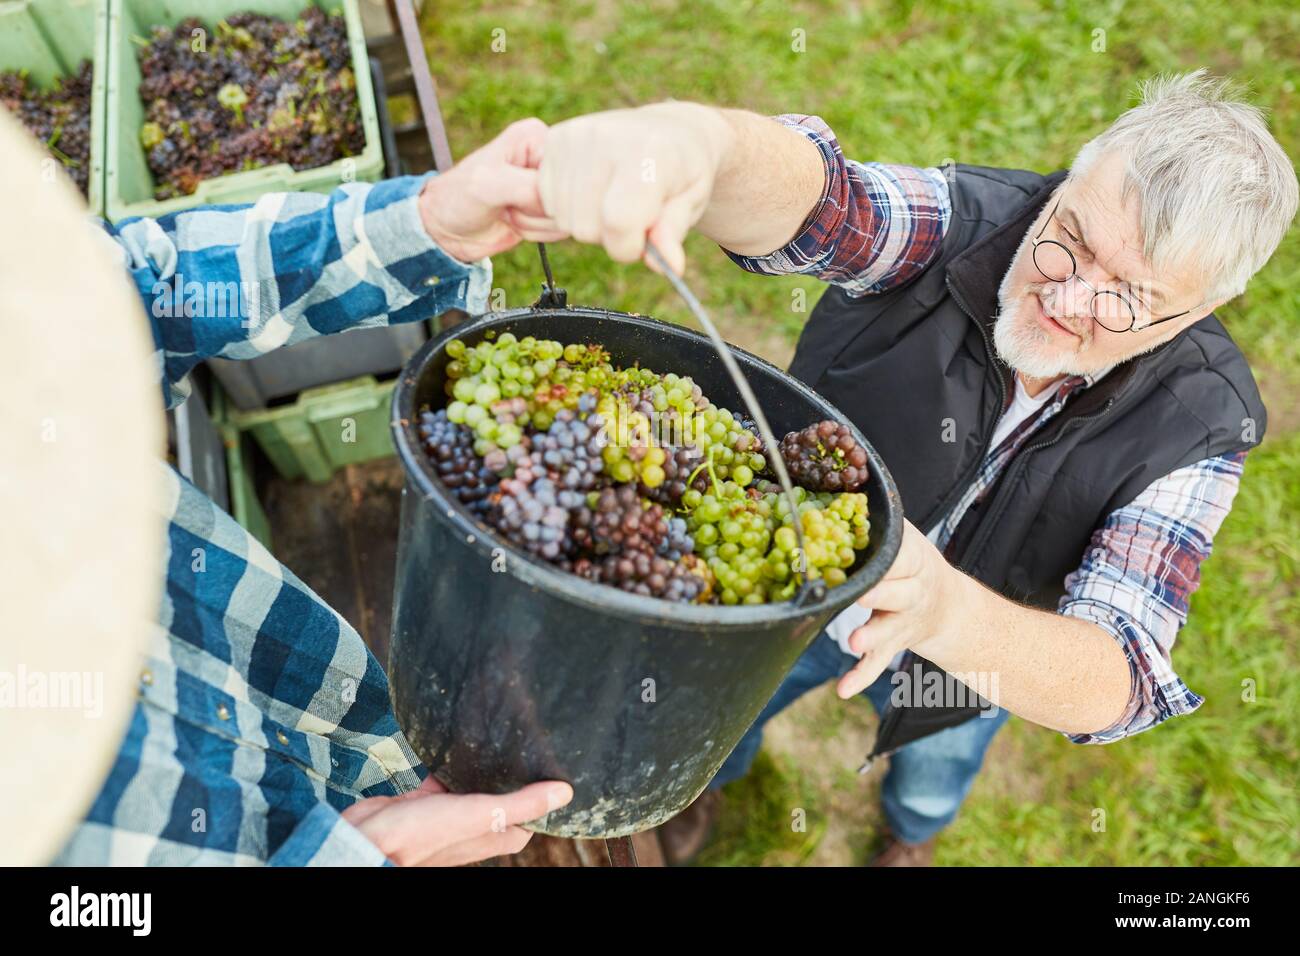 Harvest worker harvesting grapes in the vineyard with a bucket full of grapes Stock Photo